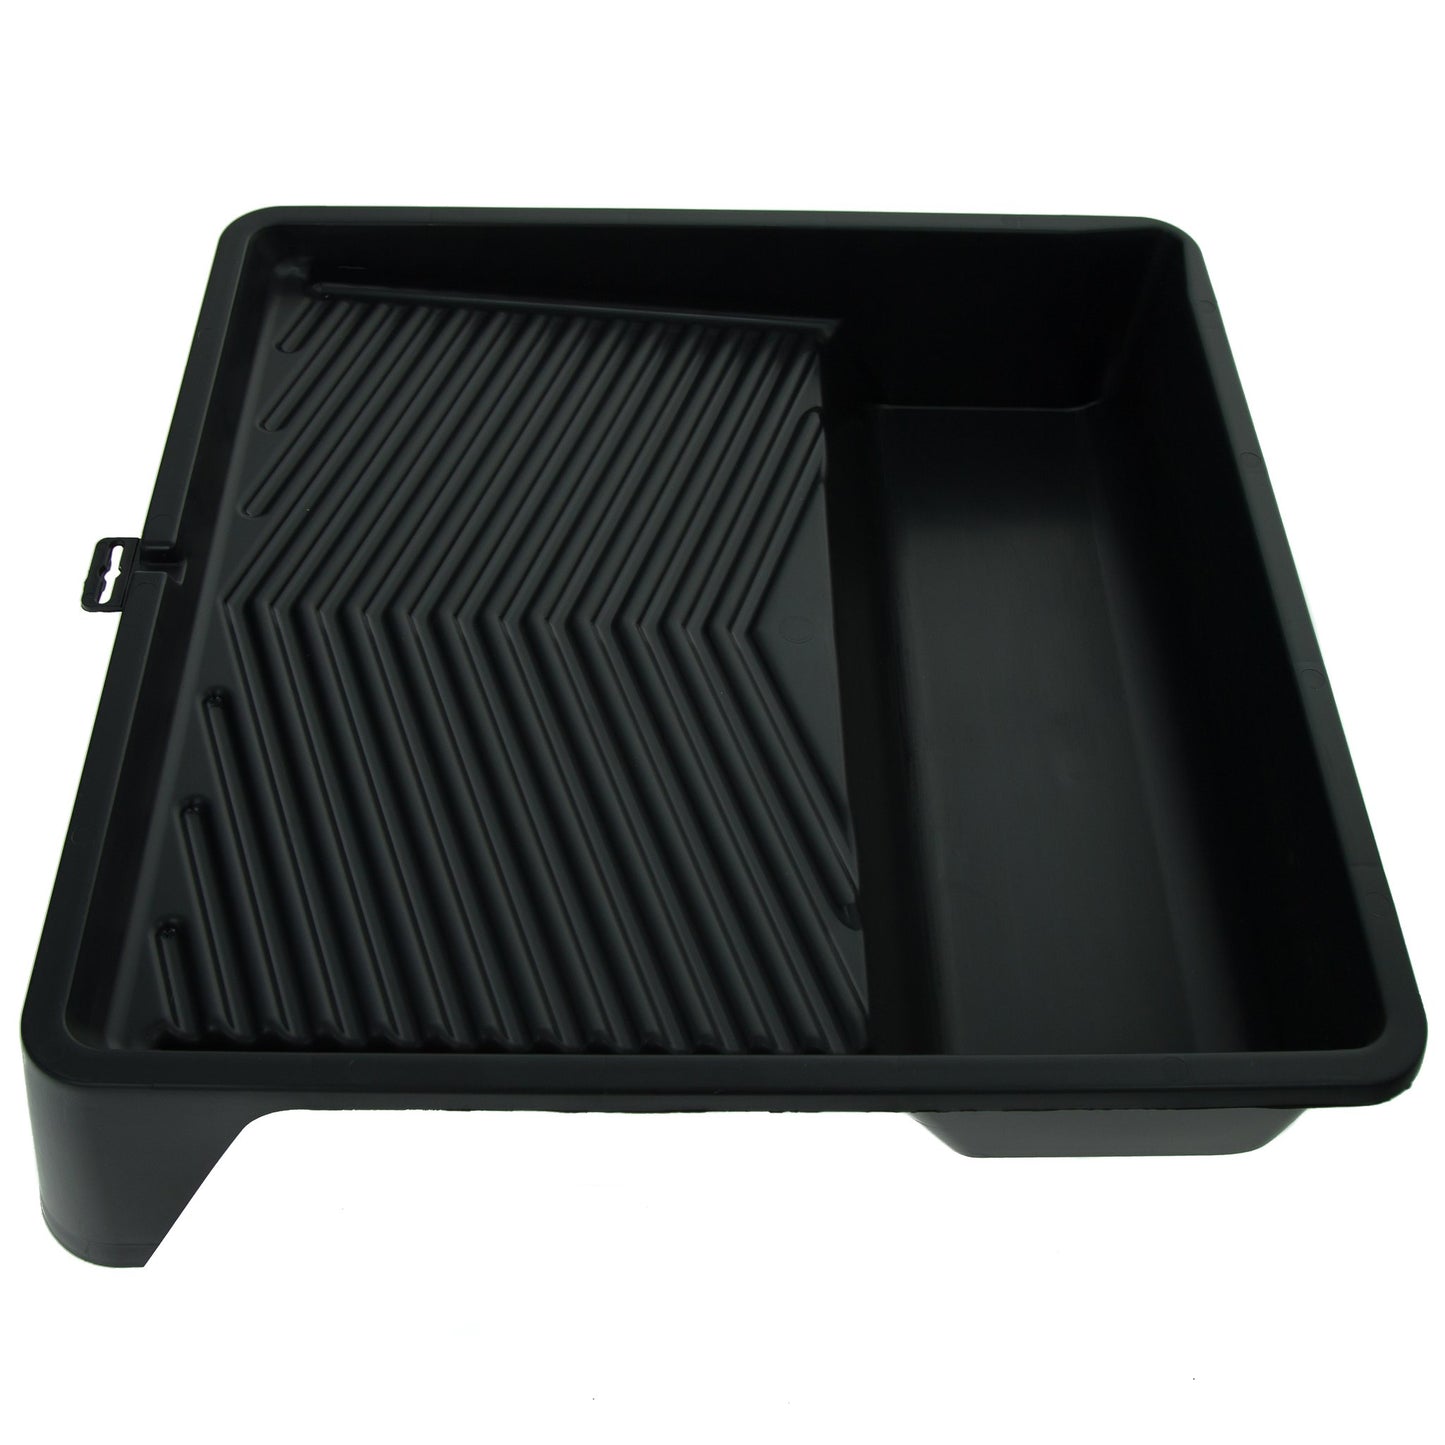 Heavy Duty Endurance Paint Roller Tray for Rollers up to 15in